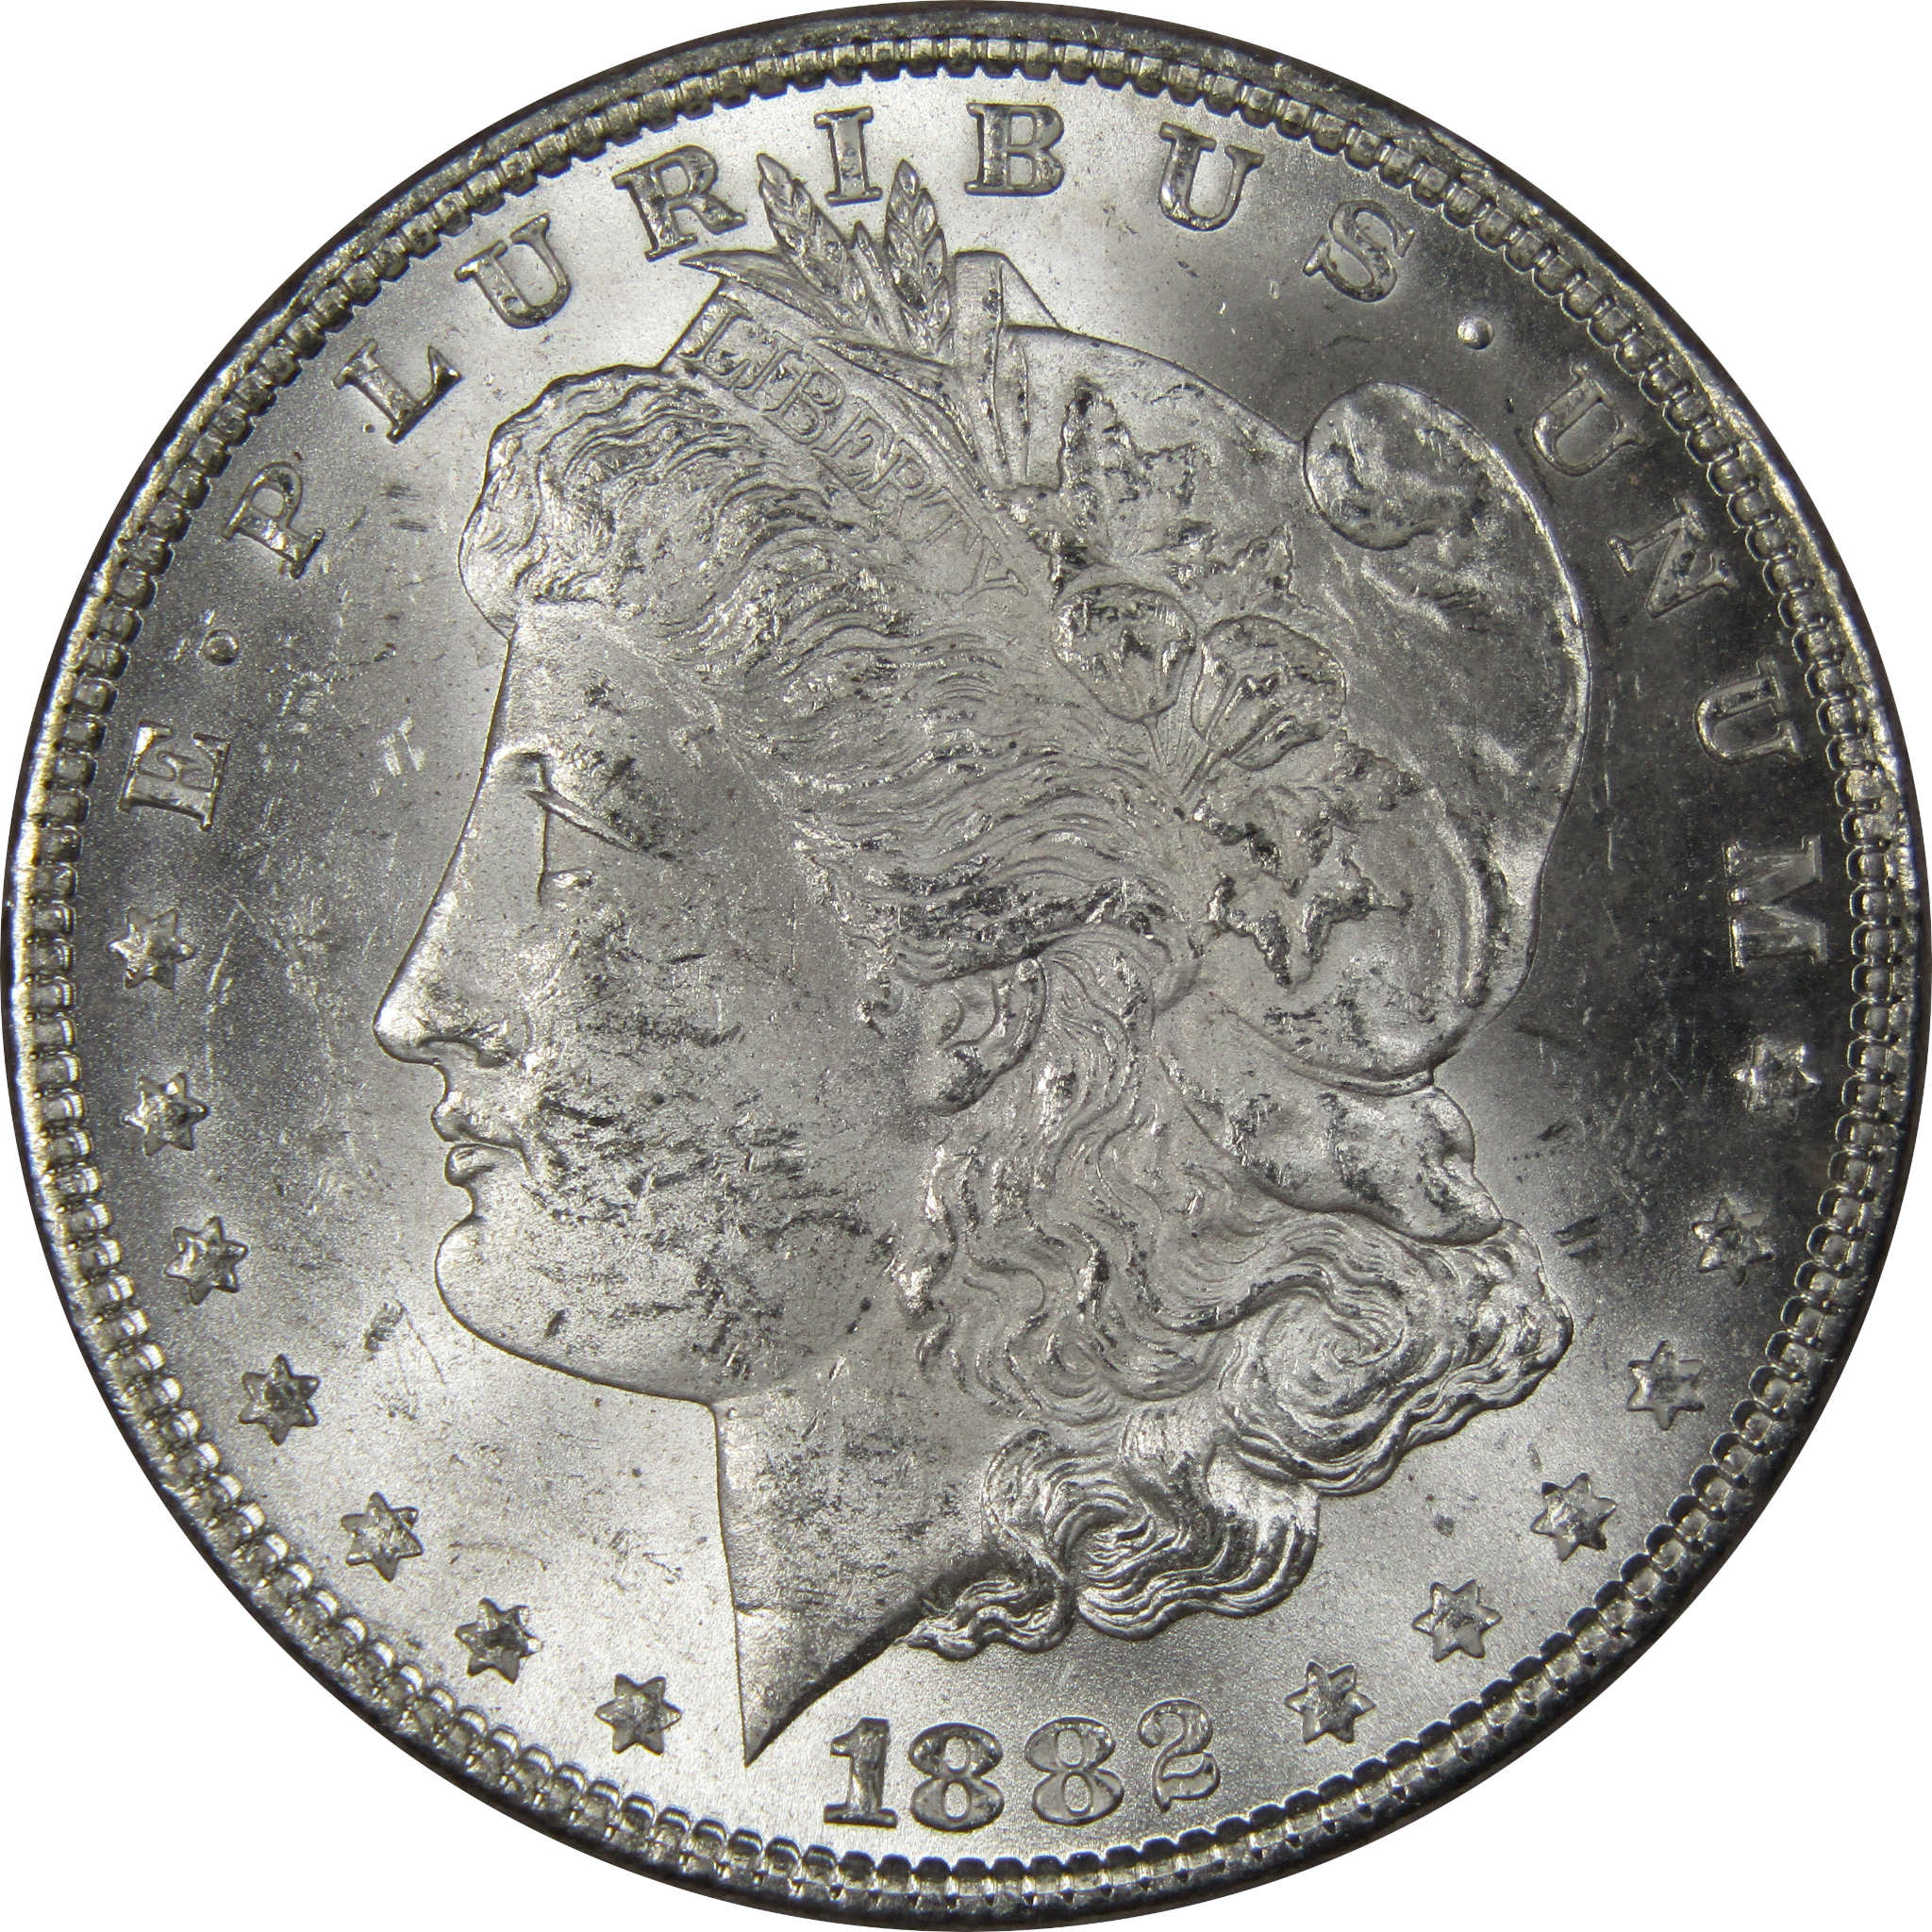 1882 Morgan Dollar BU Uncirculated Mint State 90% Silver SKU:IPC9649 - Morgan coin - Morgan silver dollar - Morgan silver dollar for sale - Profile Coins &amp; Collectibles